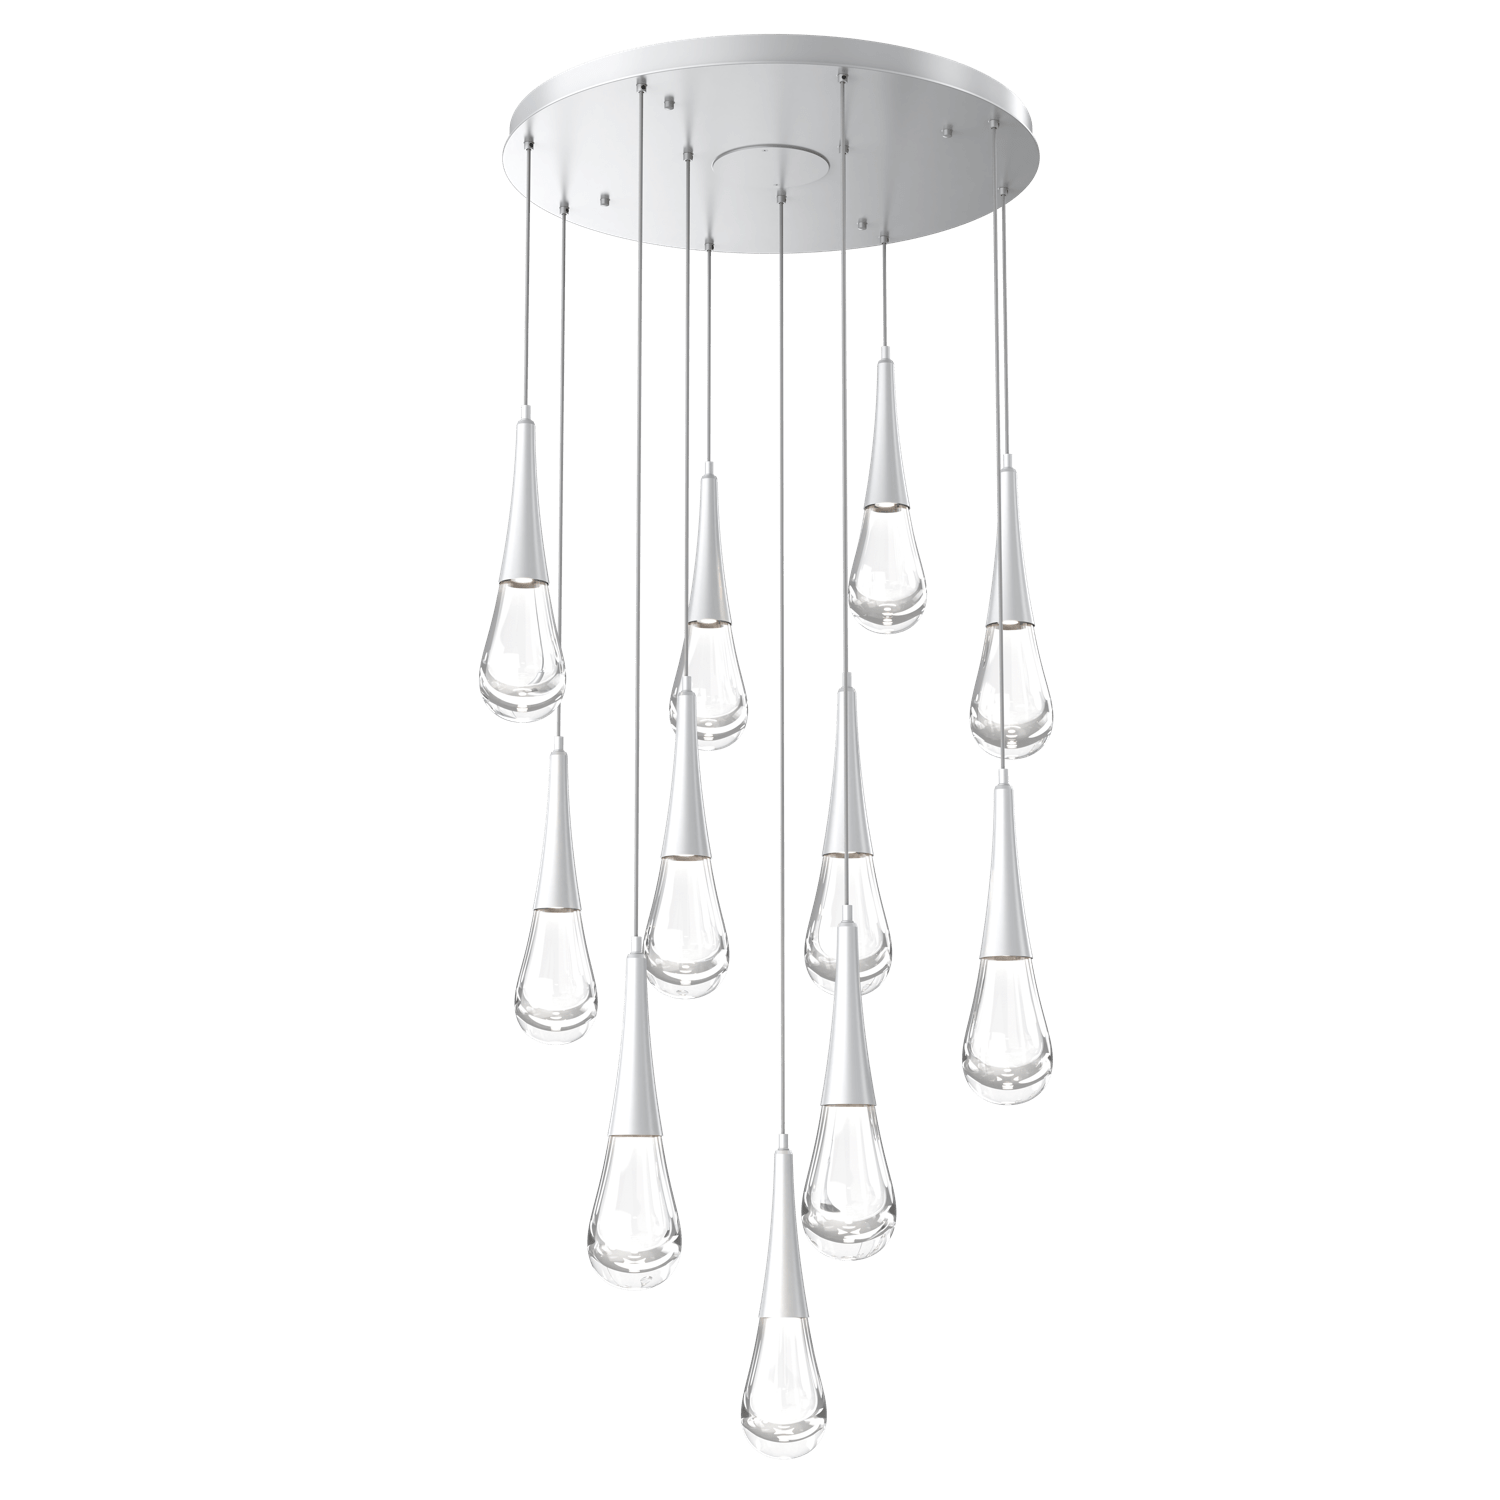 CHB0078-11-CS-Hammerton-Studio-Raindrop-11-light-round-pendant-chandelier-with-classic-silver-finish-and-clear-blown-glass-shades-and-LED-lamping